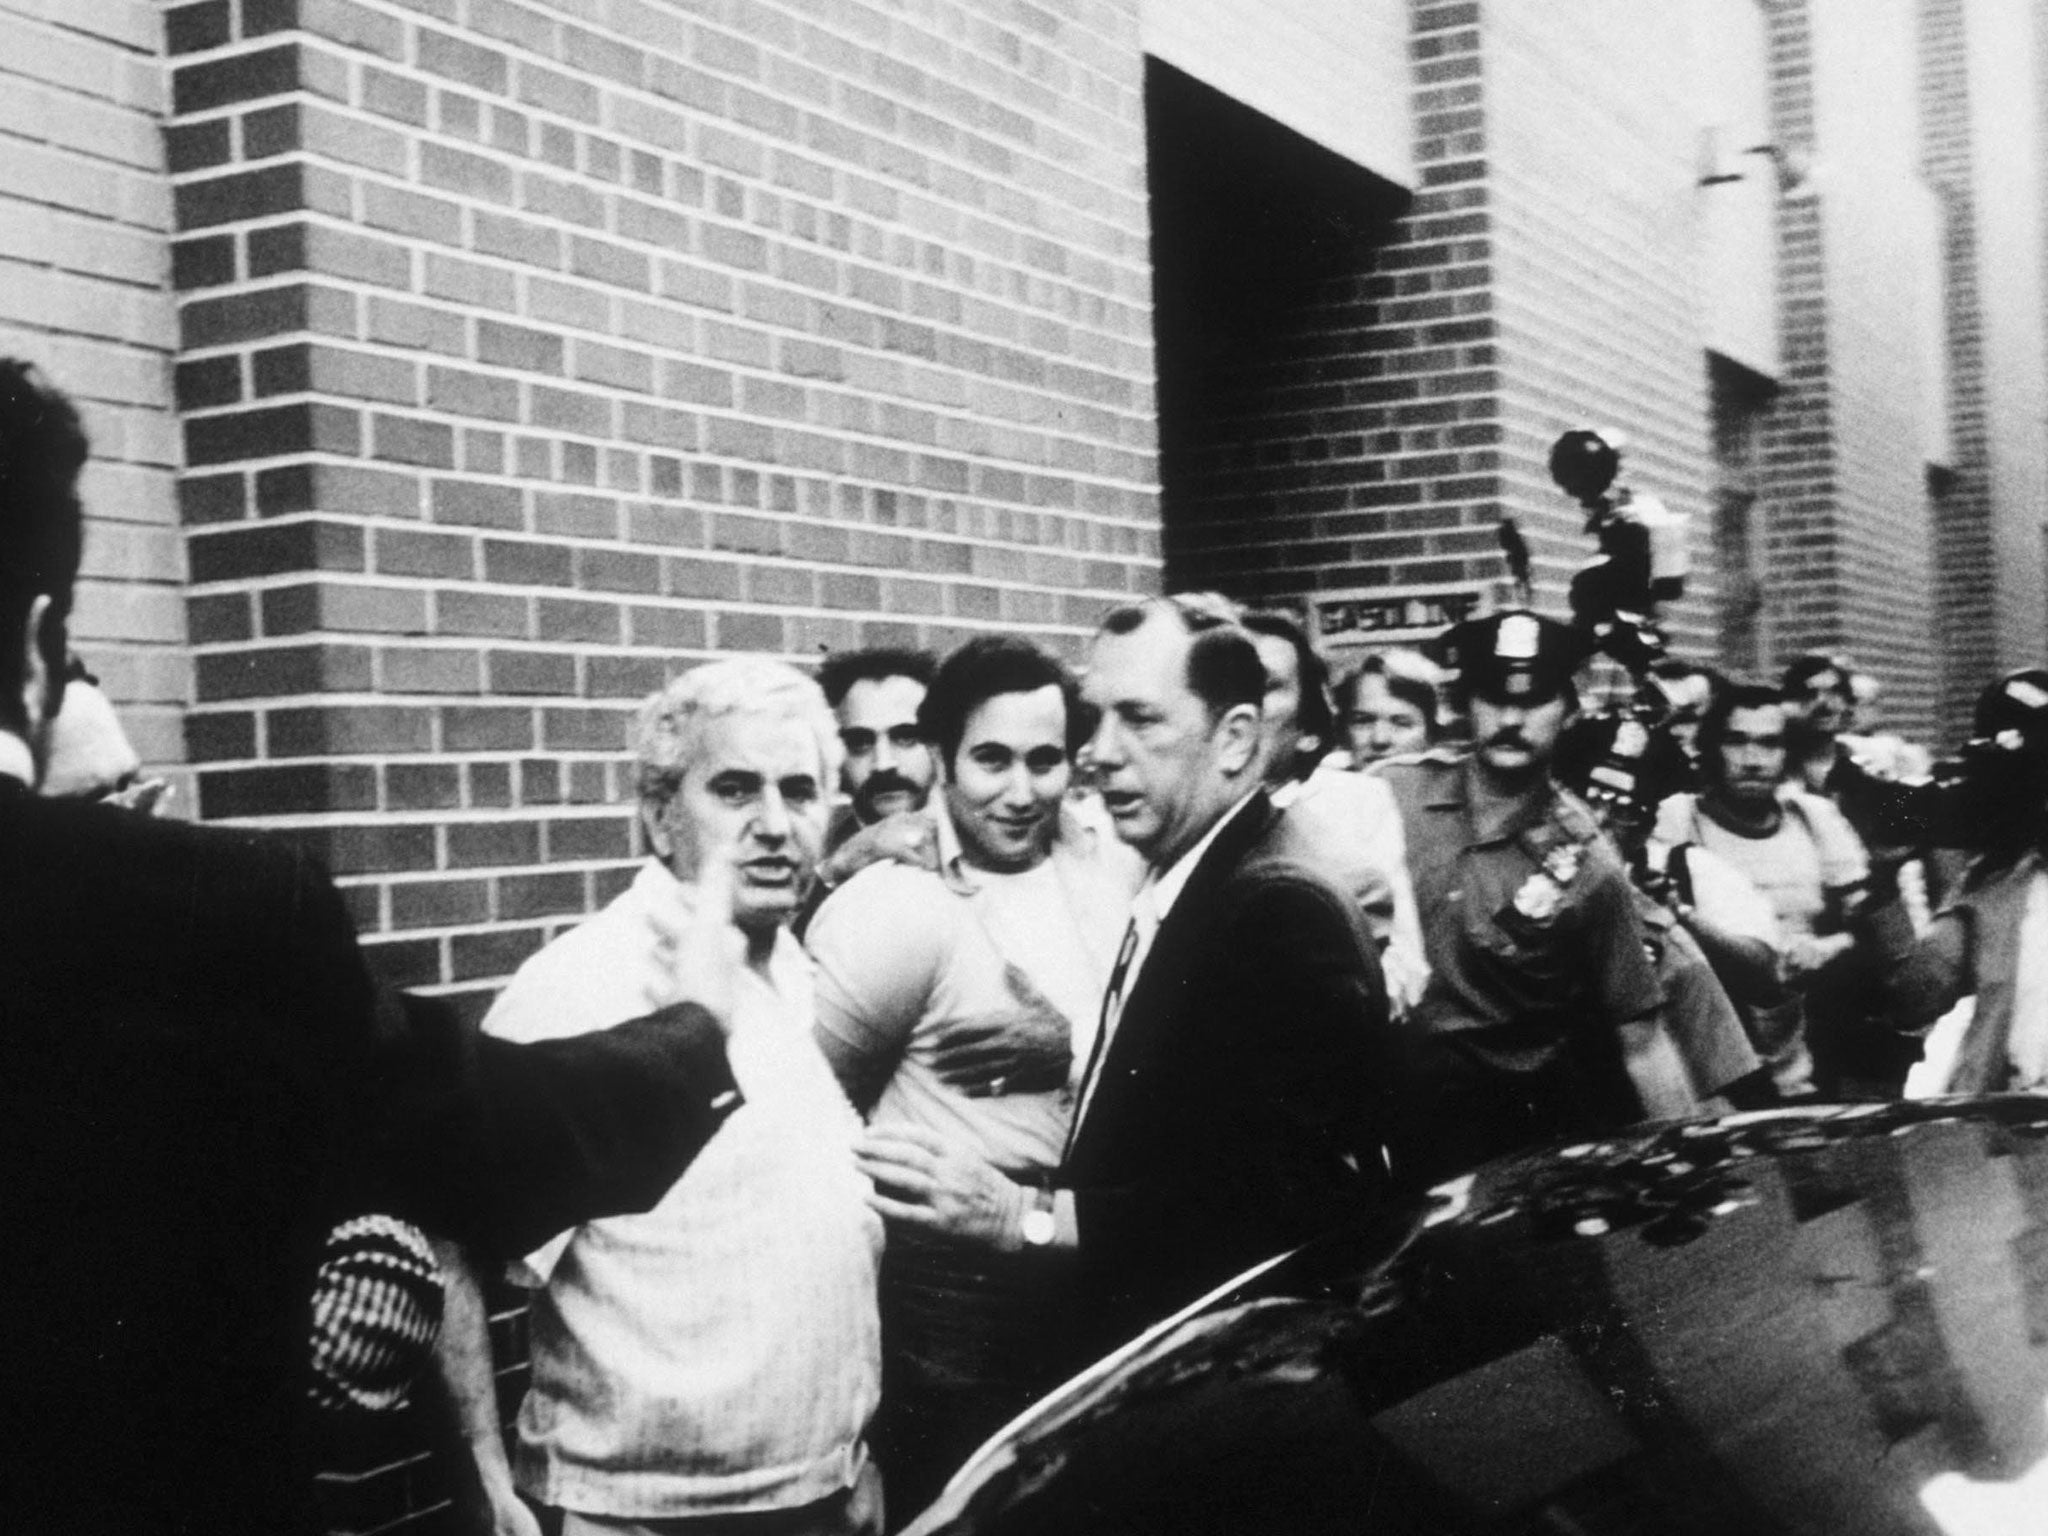 Serial killer David Berkowitz surrounded by police and reporters